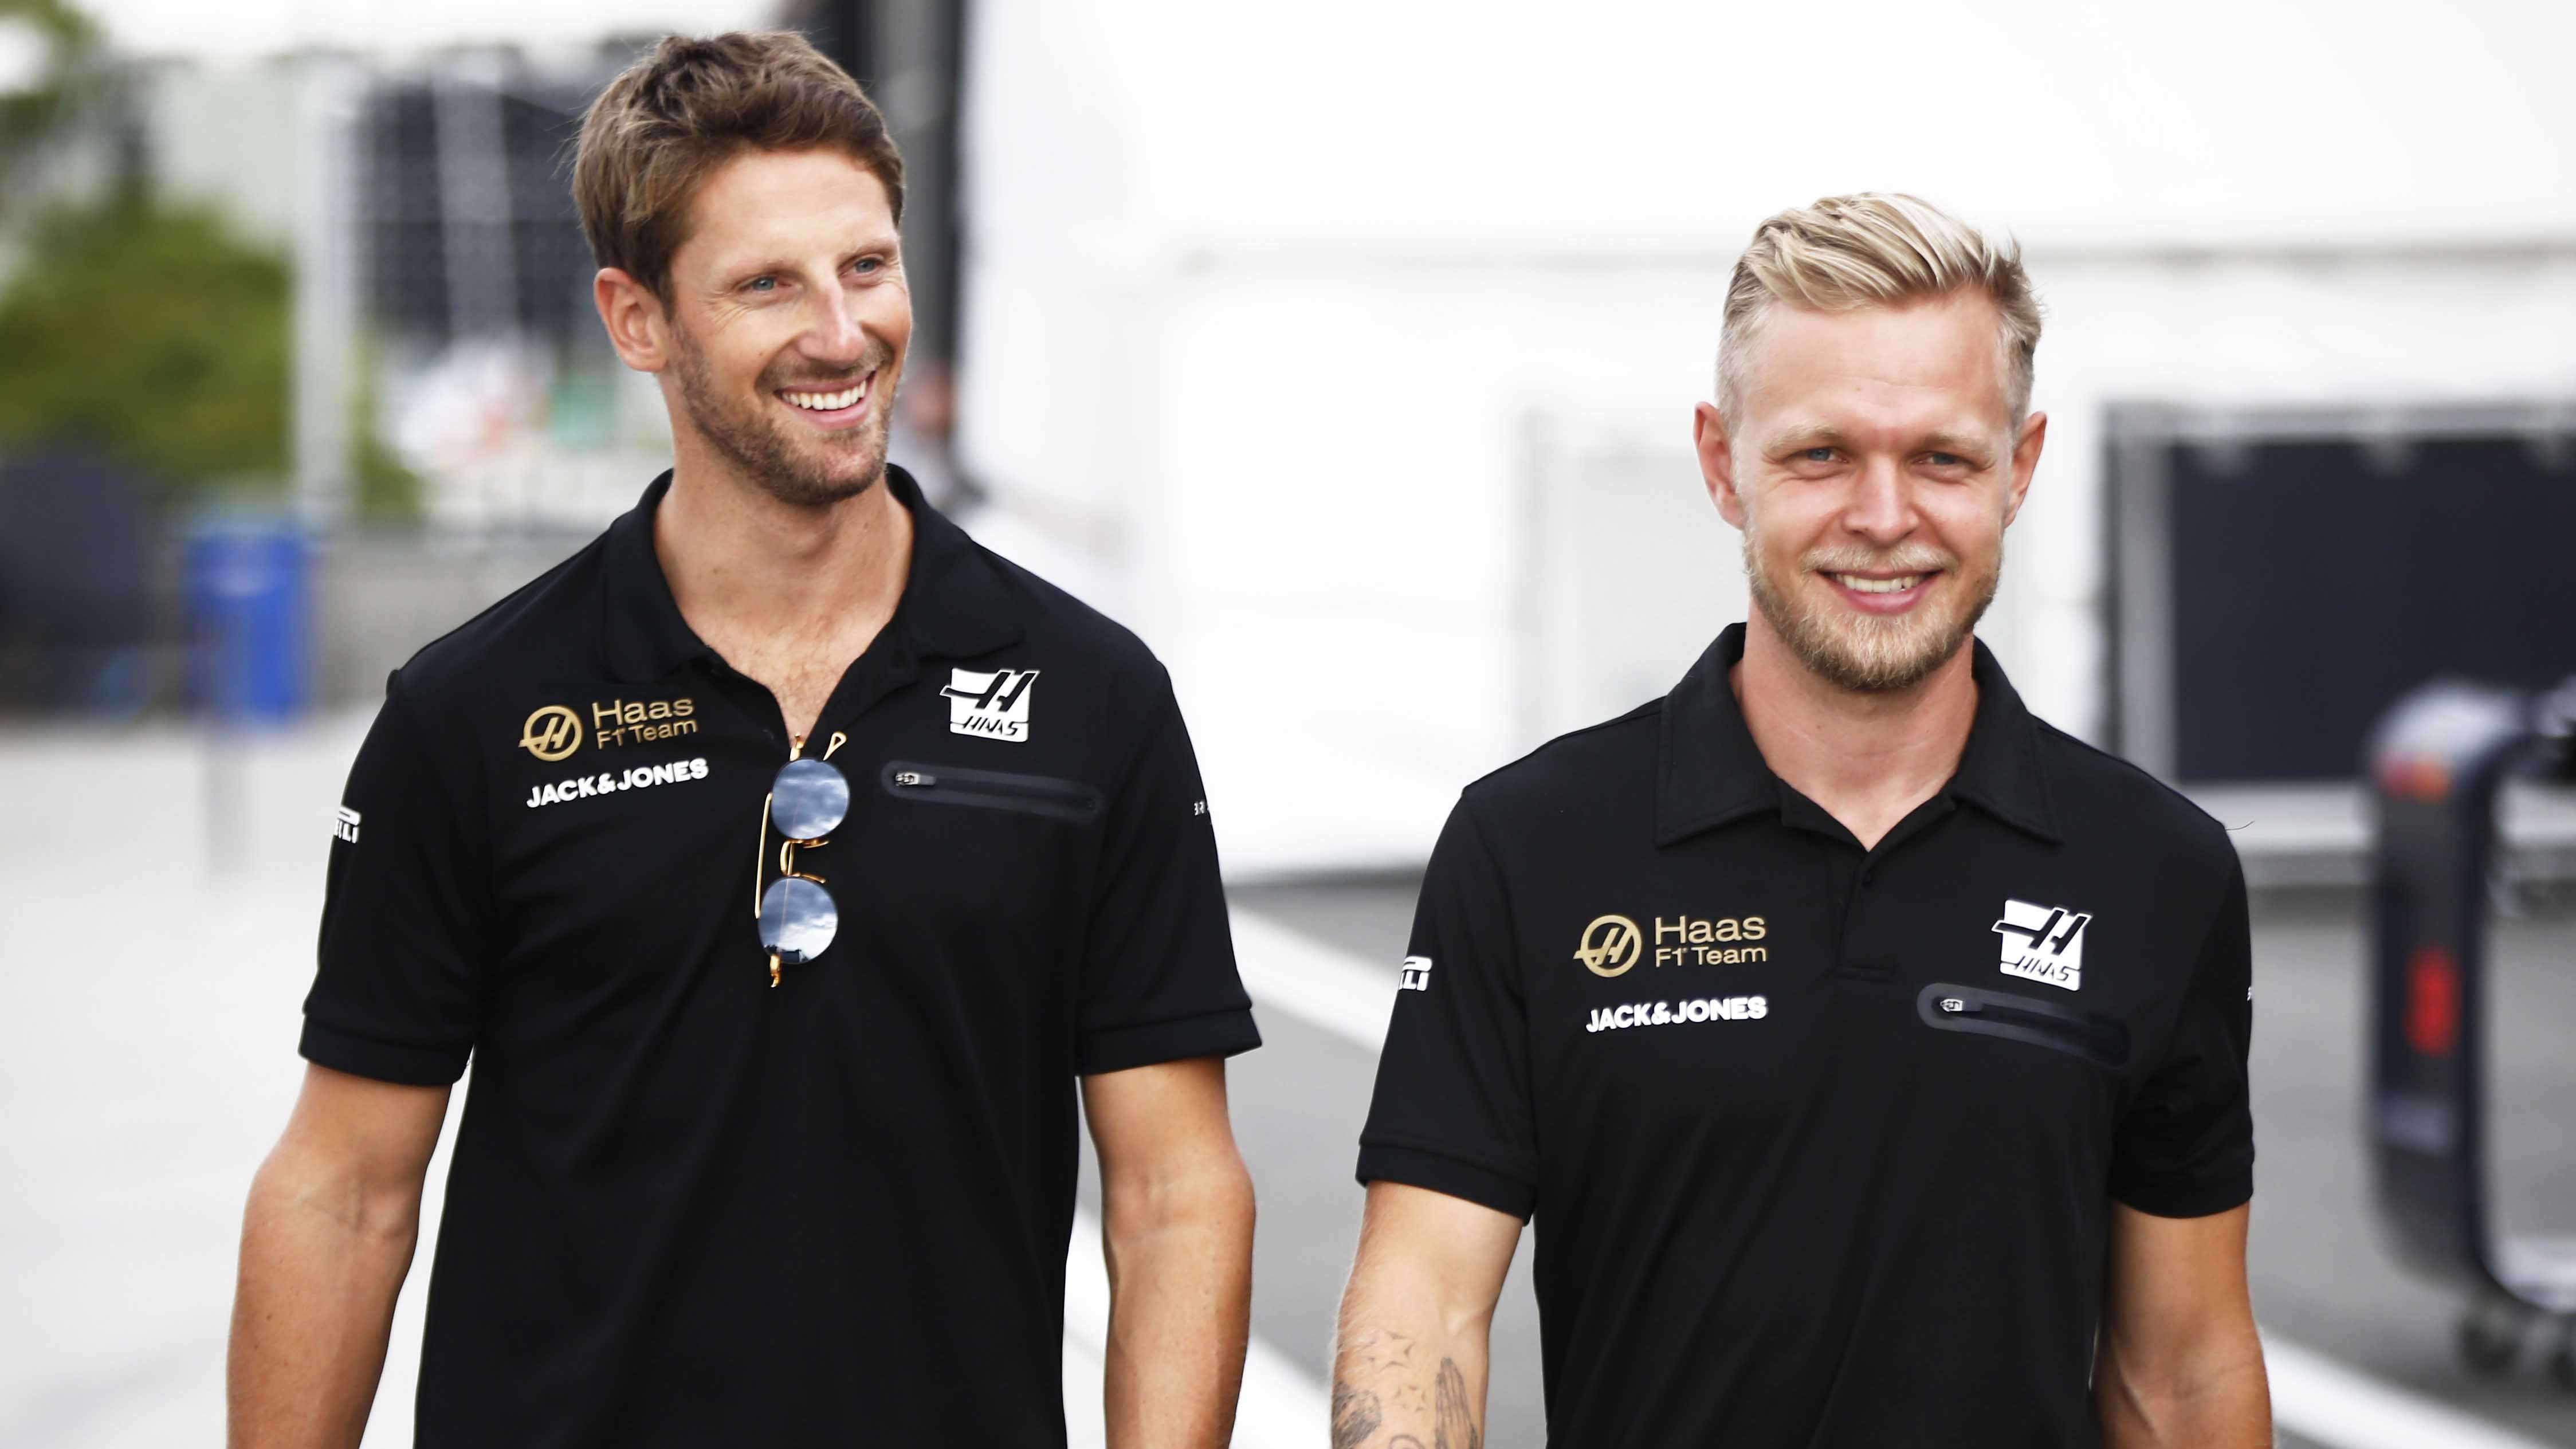 image for Haas F1 Team Confirms Grosjean and Magnussen for 2020